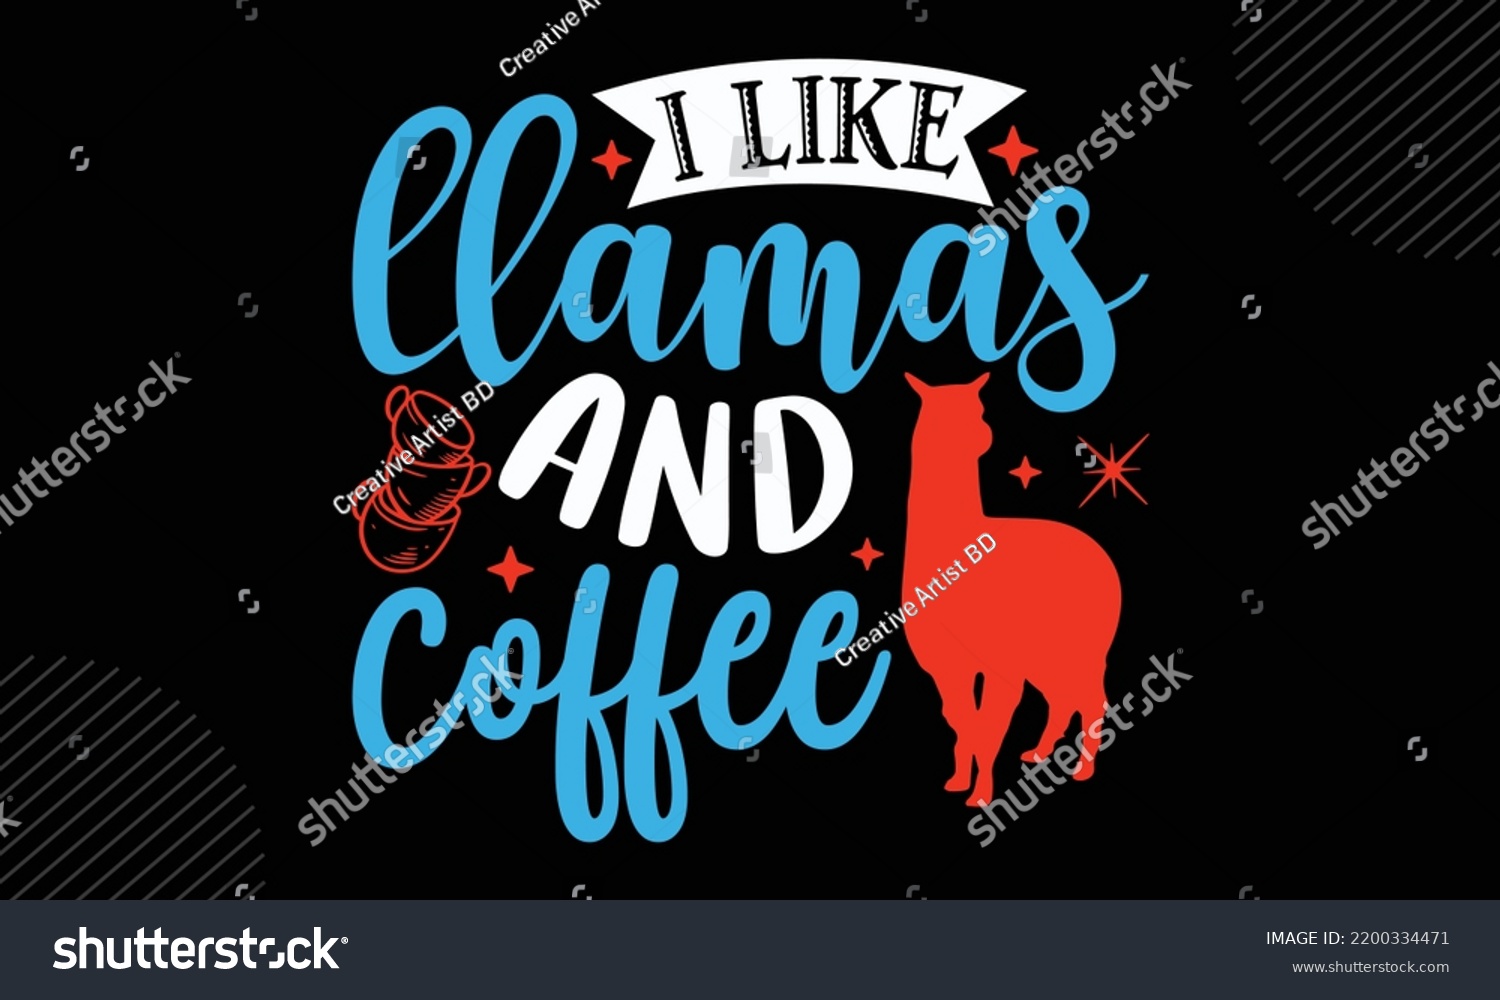 SVG of I Like Llamas And Coffee - Llama T shirt Design, Hand drawn vintage illustration with hand-lettering and decoration elements, Cut Files for Cricut Svg, Digital Download svg